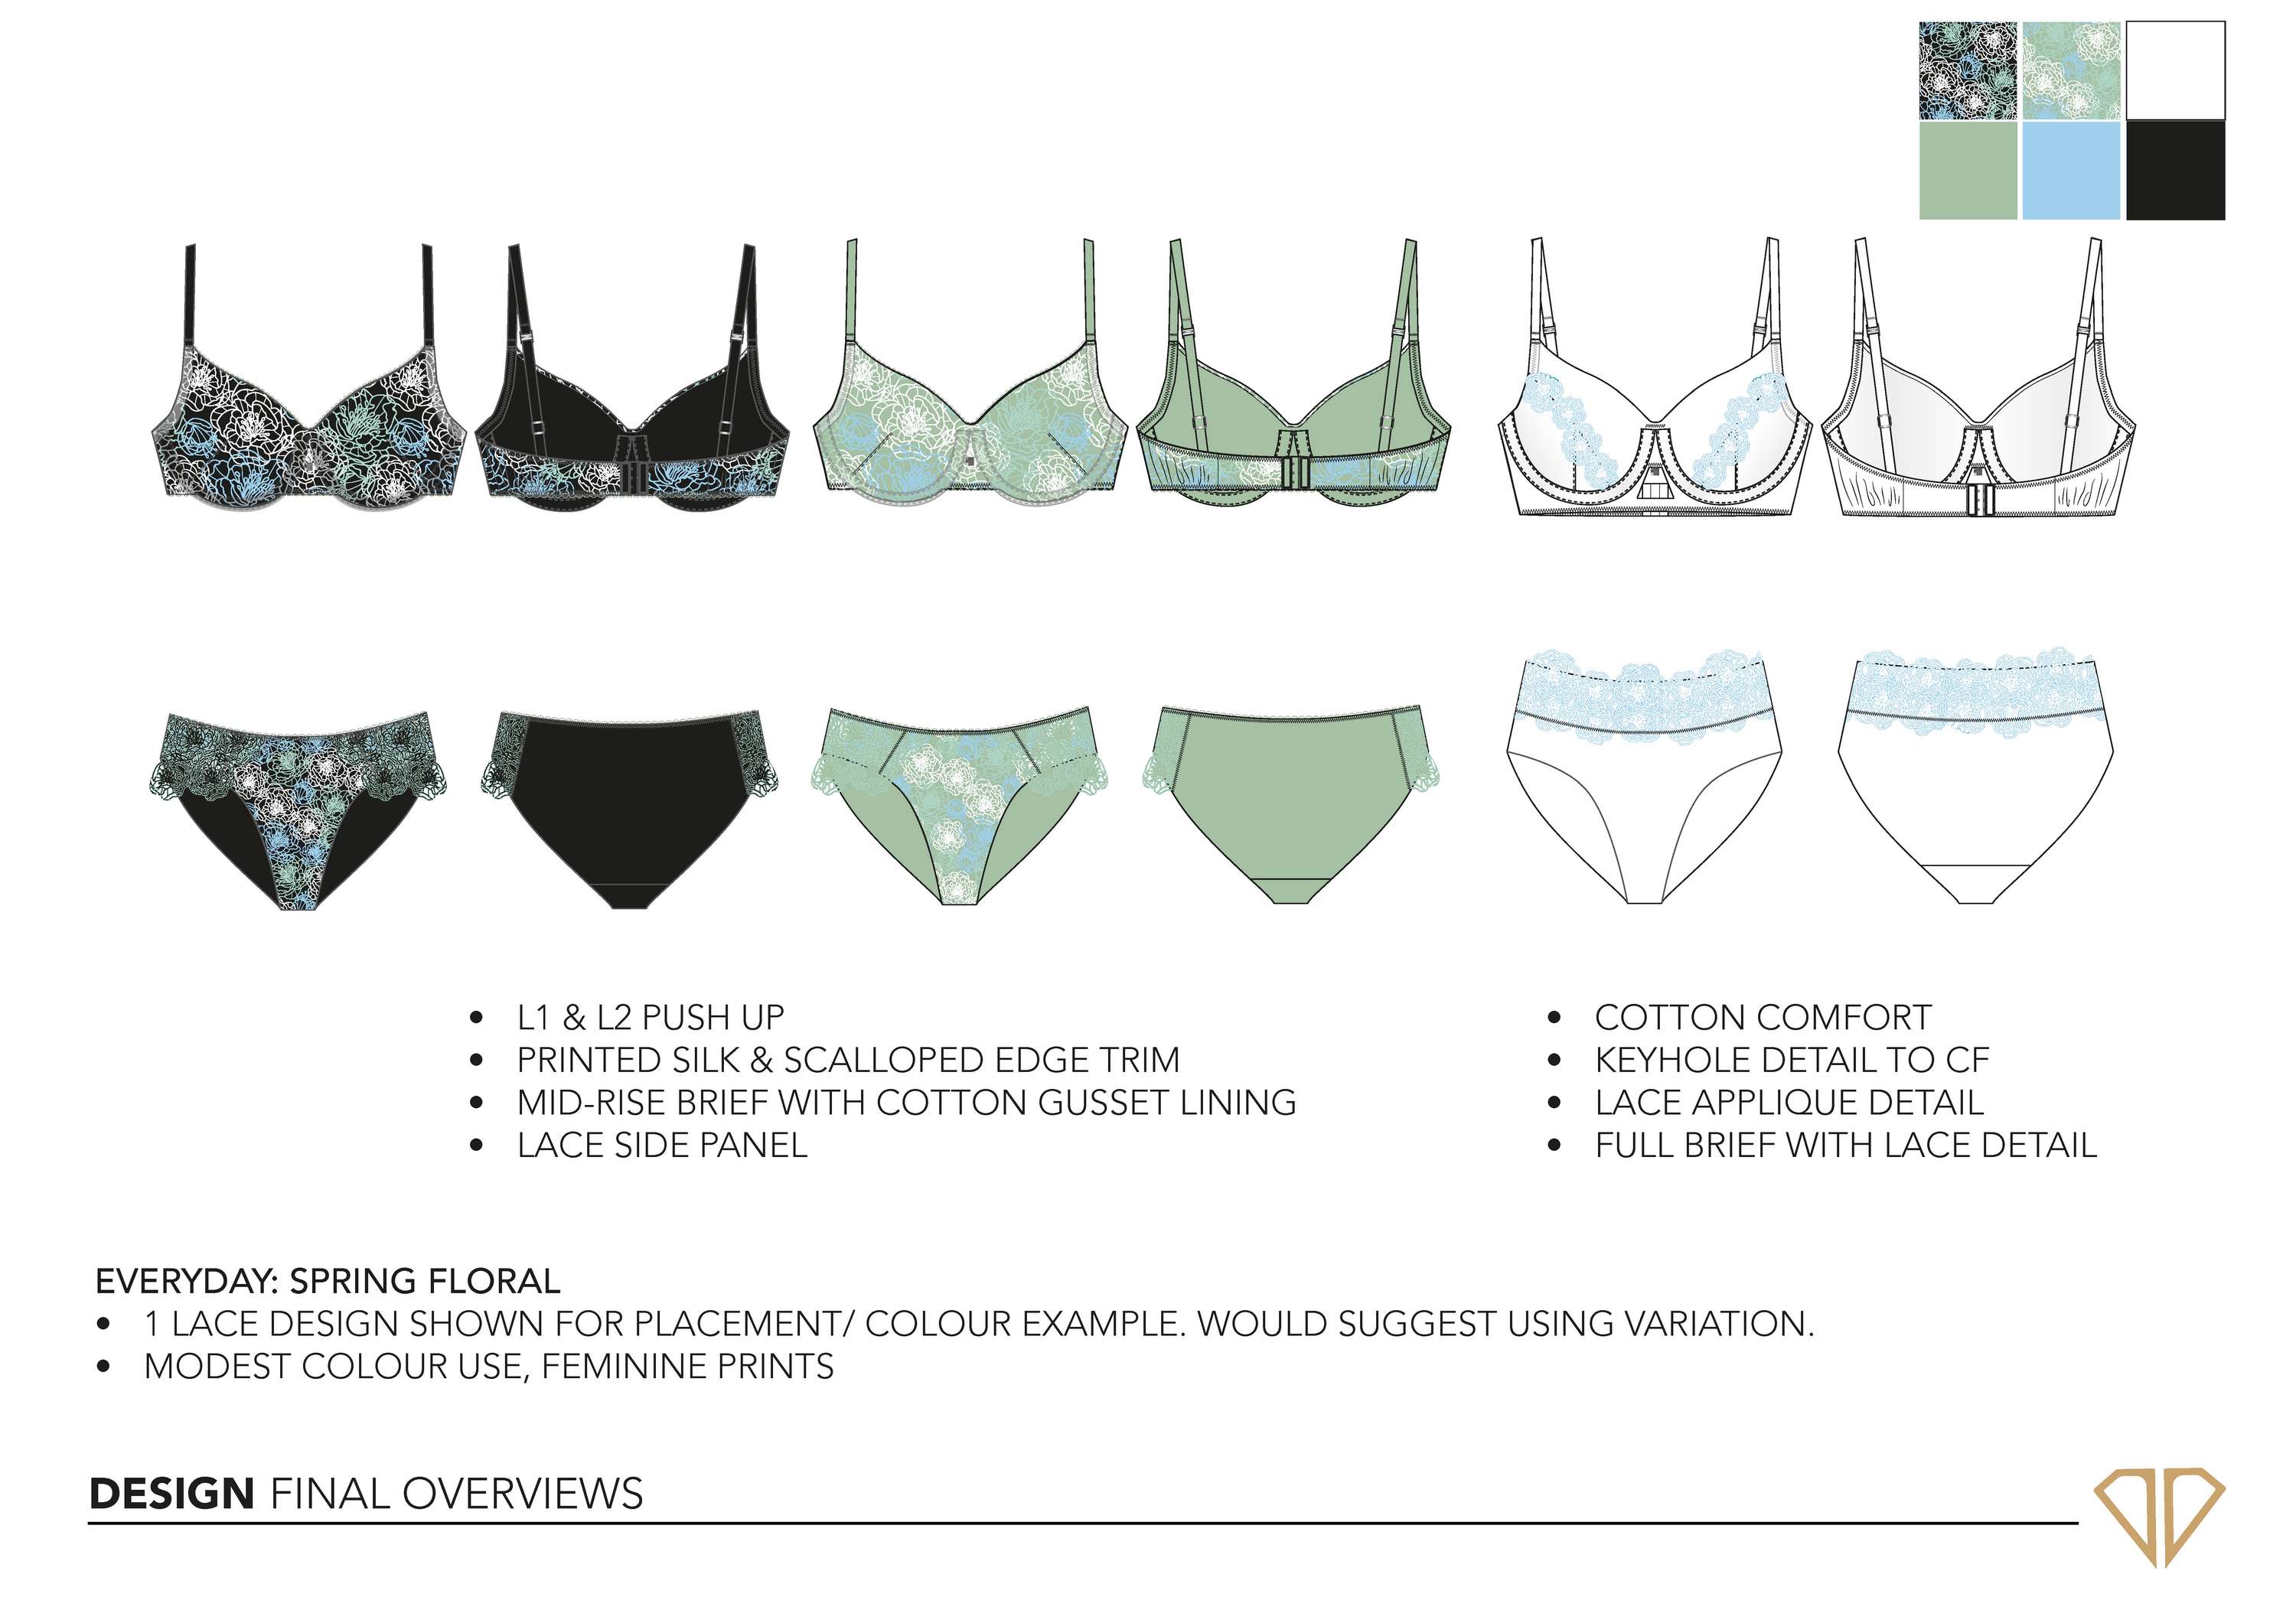 Berlei: A luxe upgrade to your everyday bra